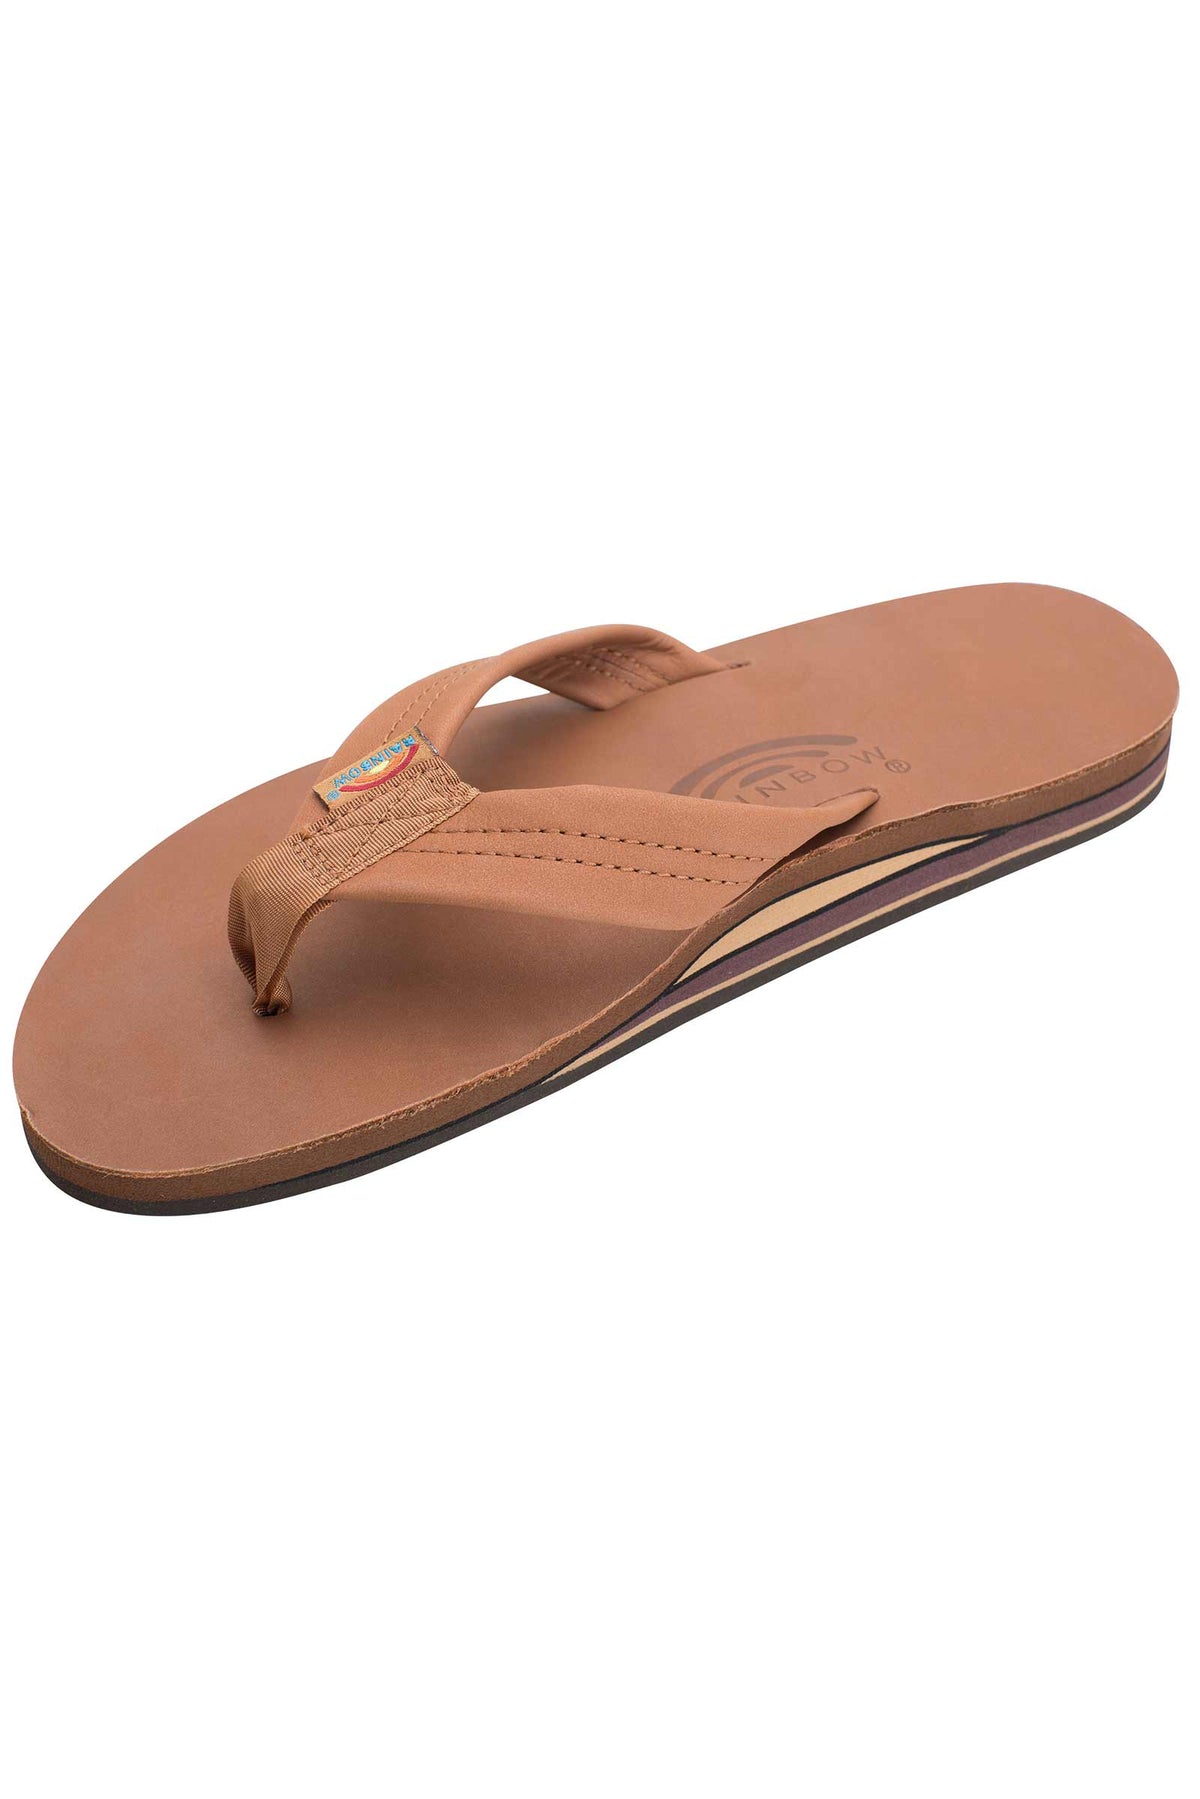 Mens Rainbow Sandals Classic Double Tan &amp; Brown